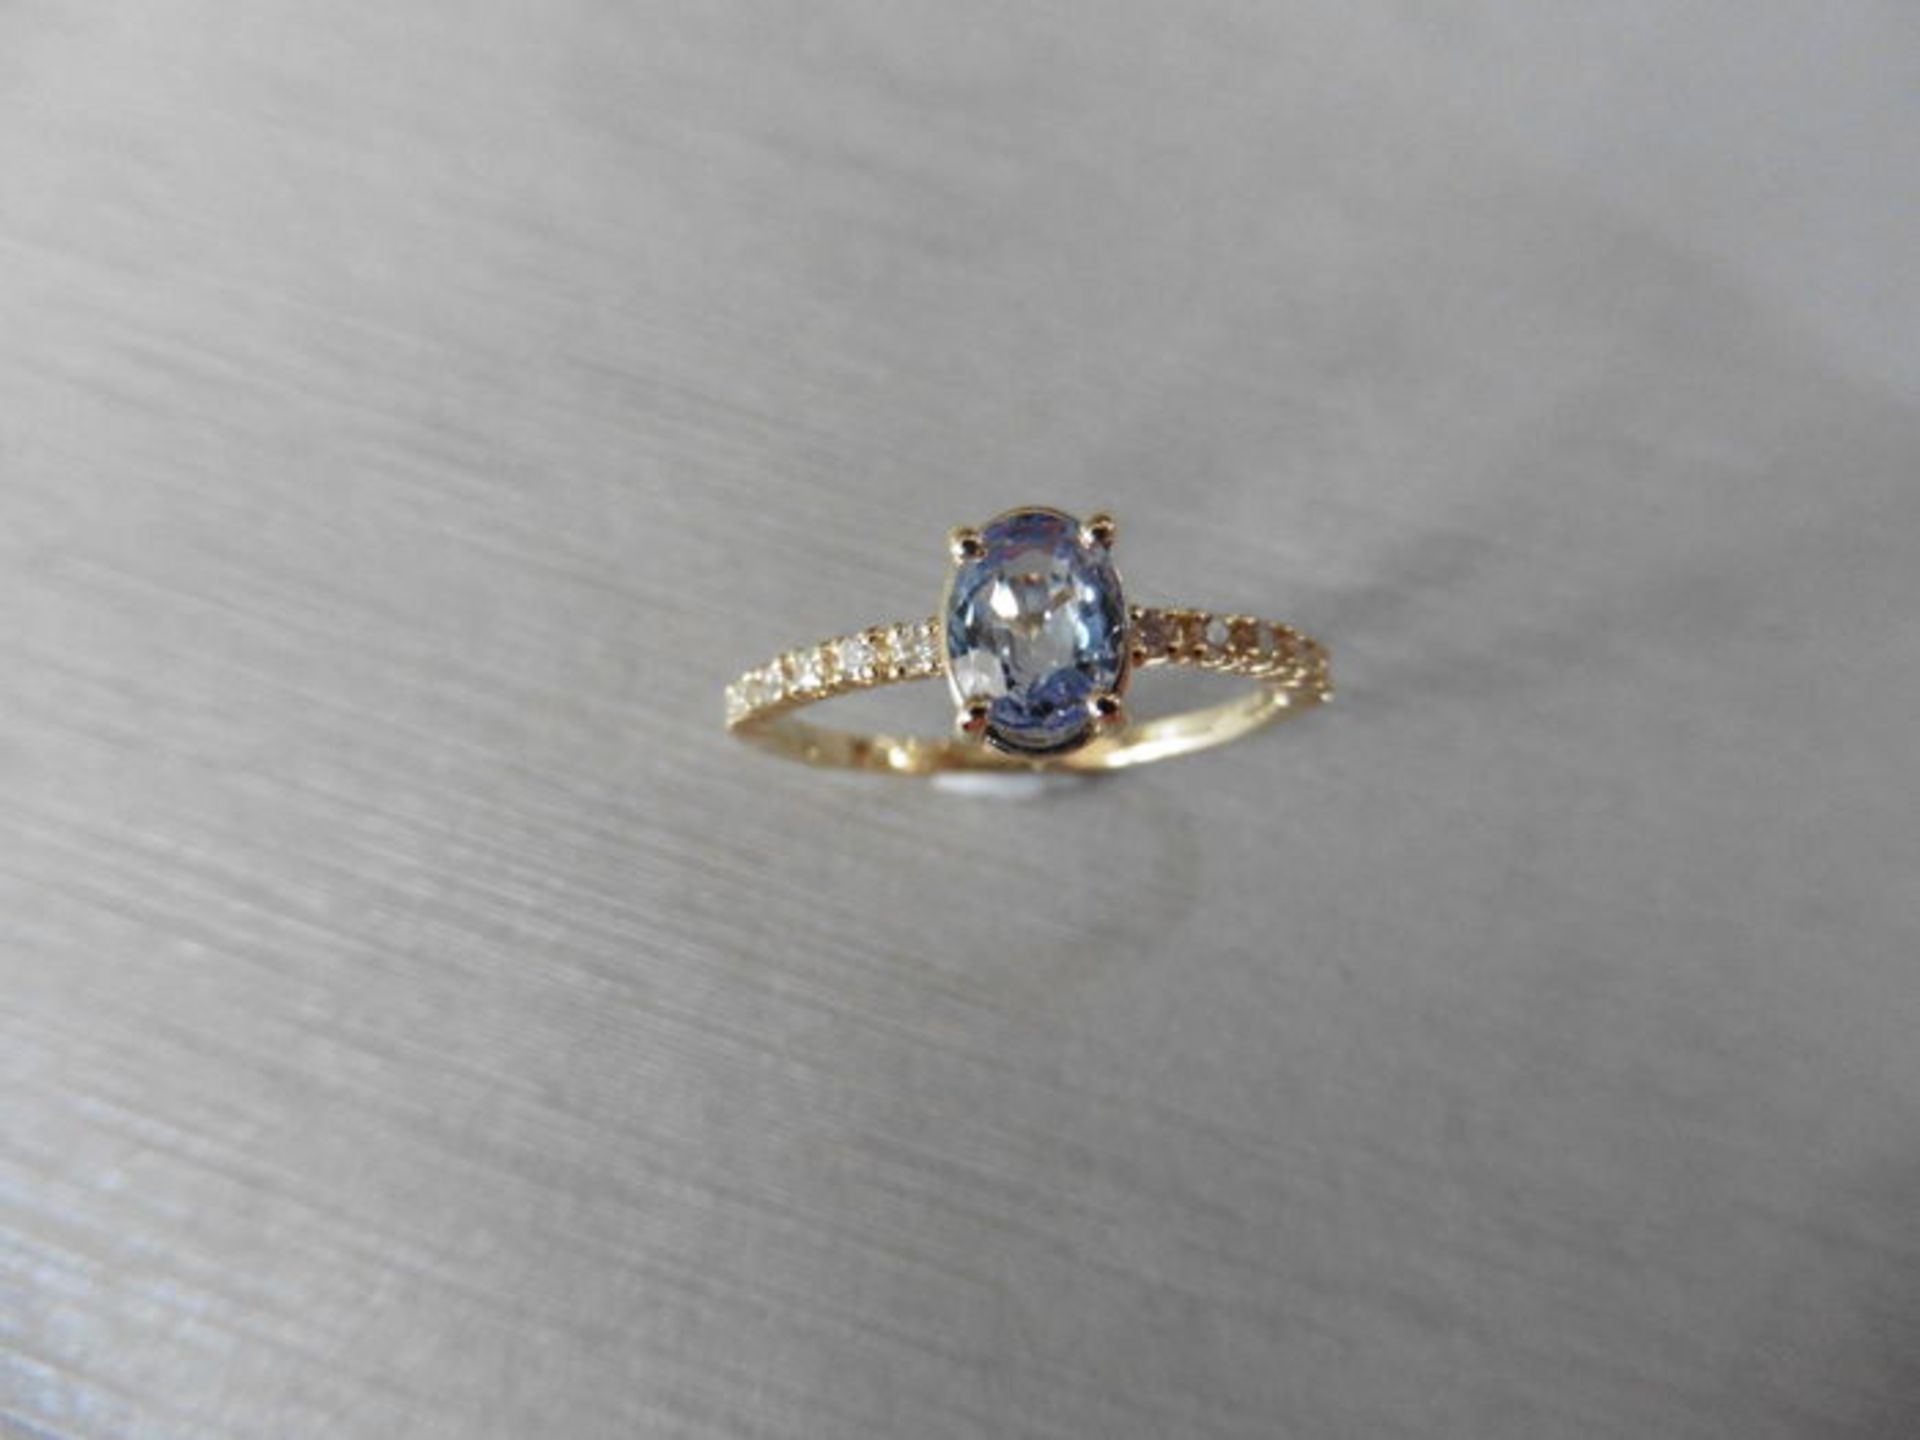 0.80ct / 0.12ct ceylon sapphire and diamond dress ring. Oval cut ( treated ) sapphire with small